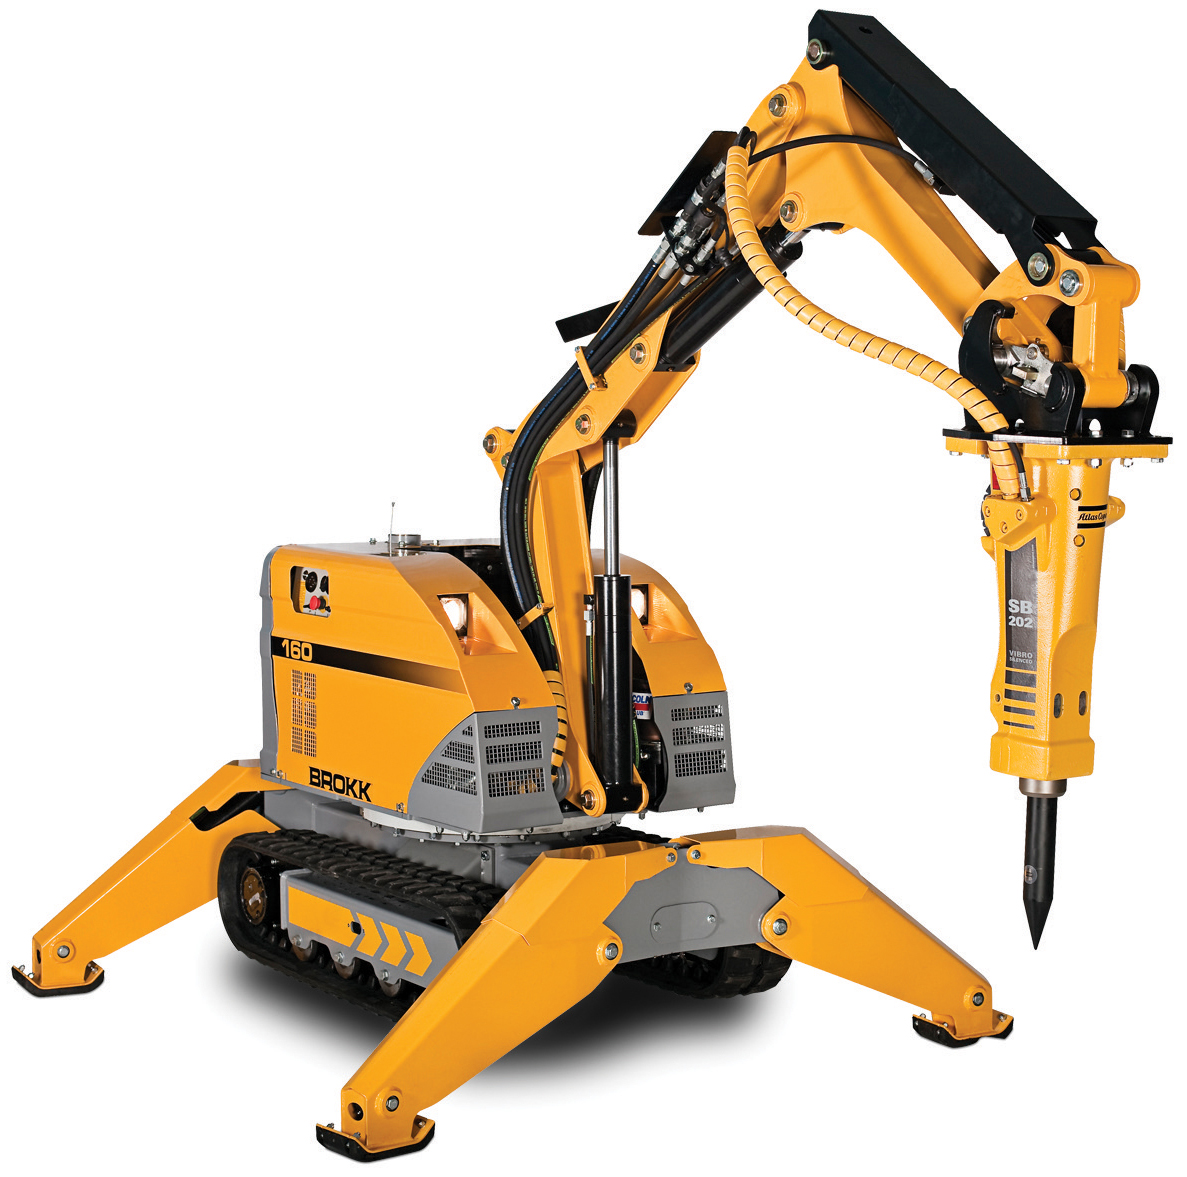 The Brokk 160 demolition machine is said by its US manufacturer to combine powerful performance and lightweight design